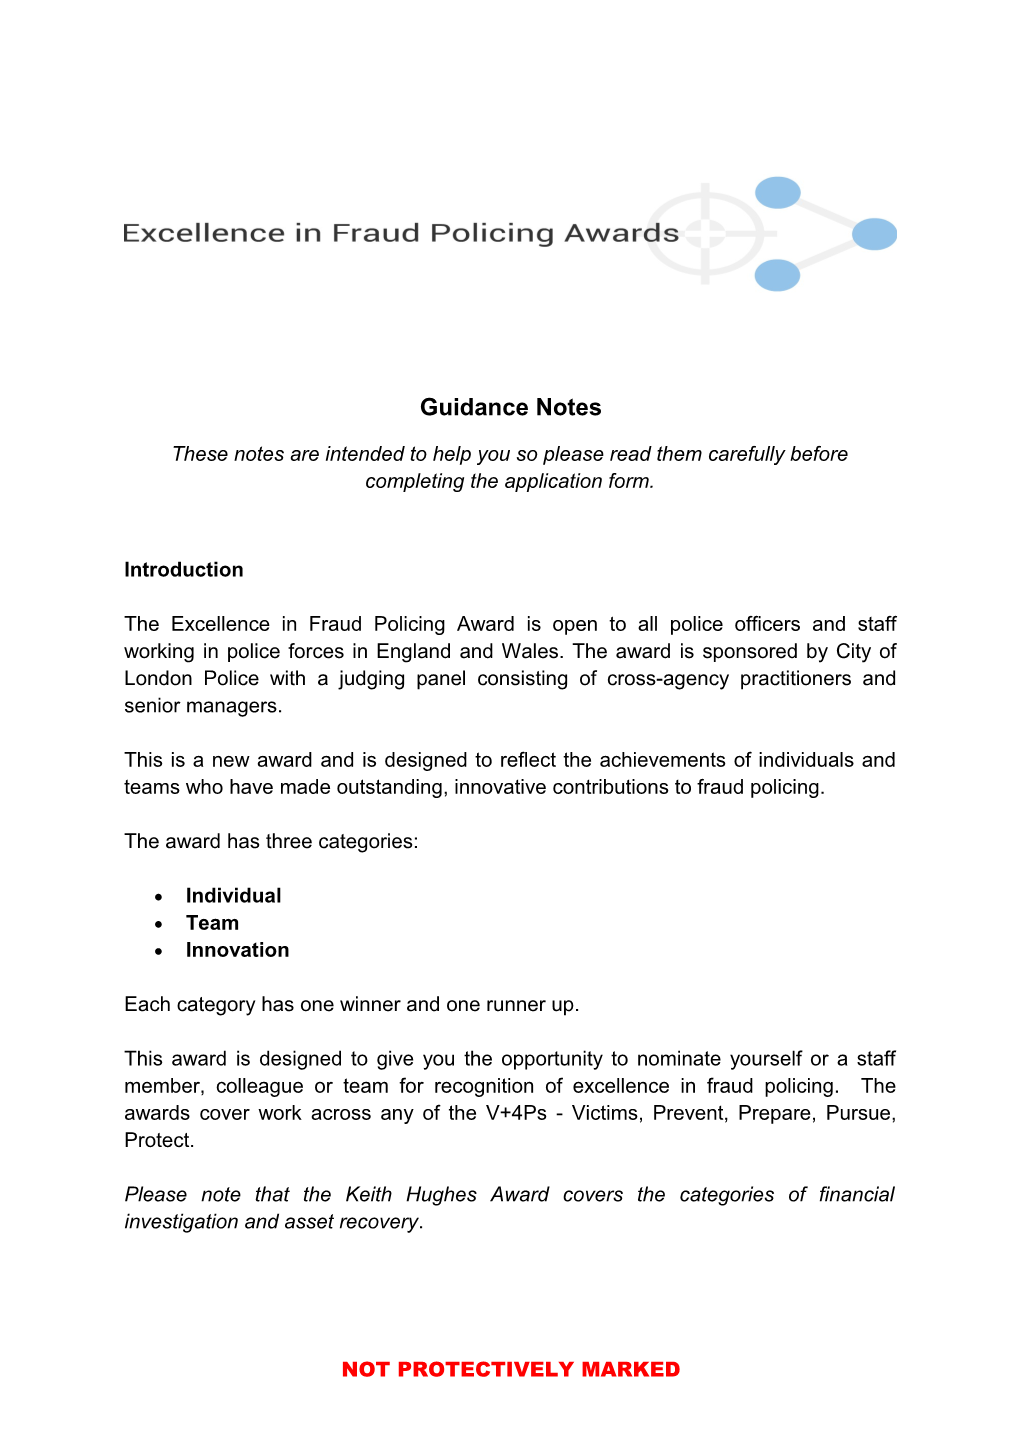 Excellence in Fraud Policing Award Guidance Notes 2017